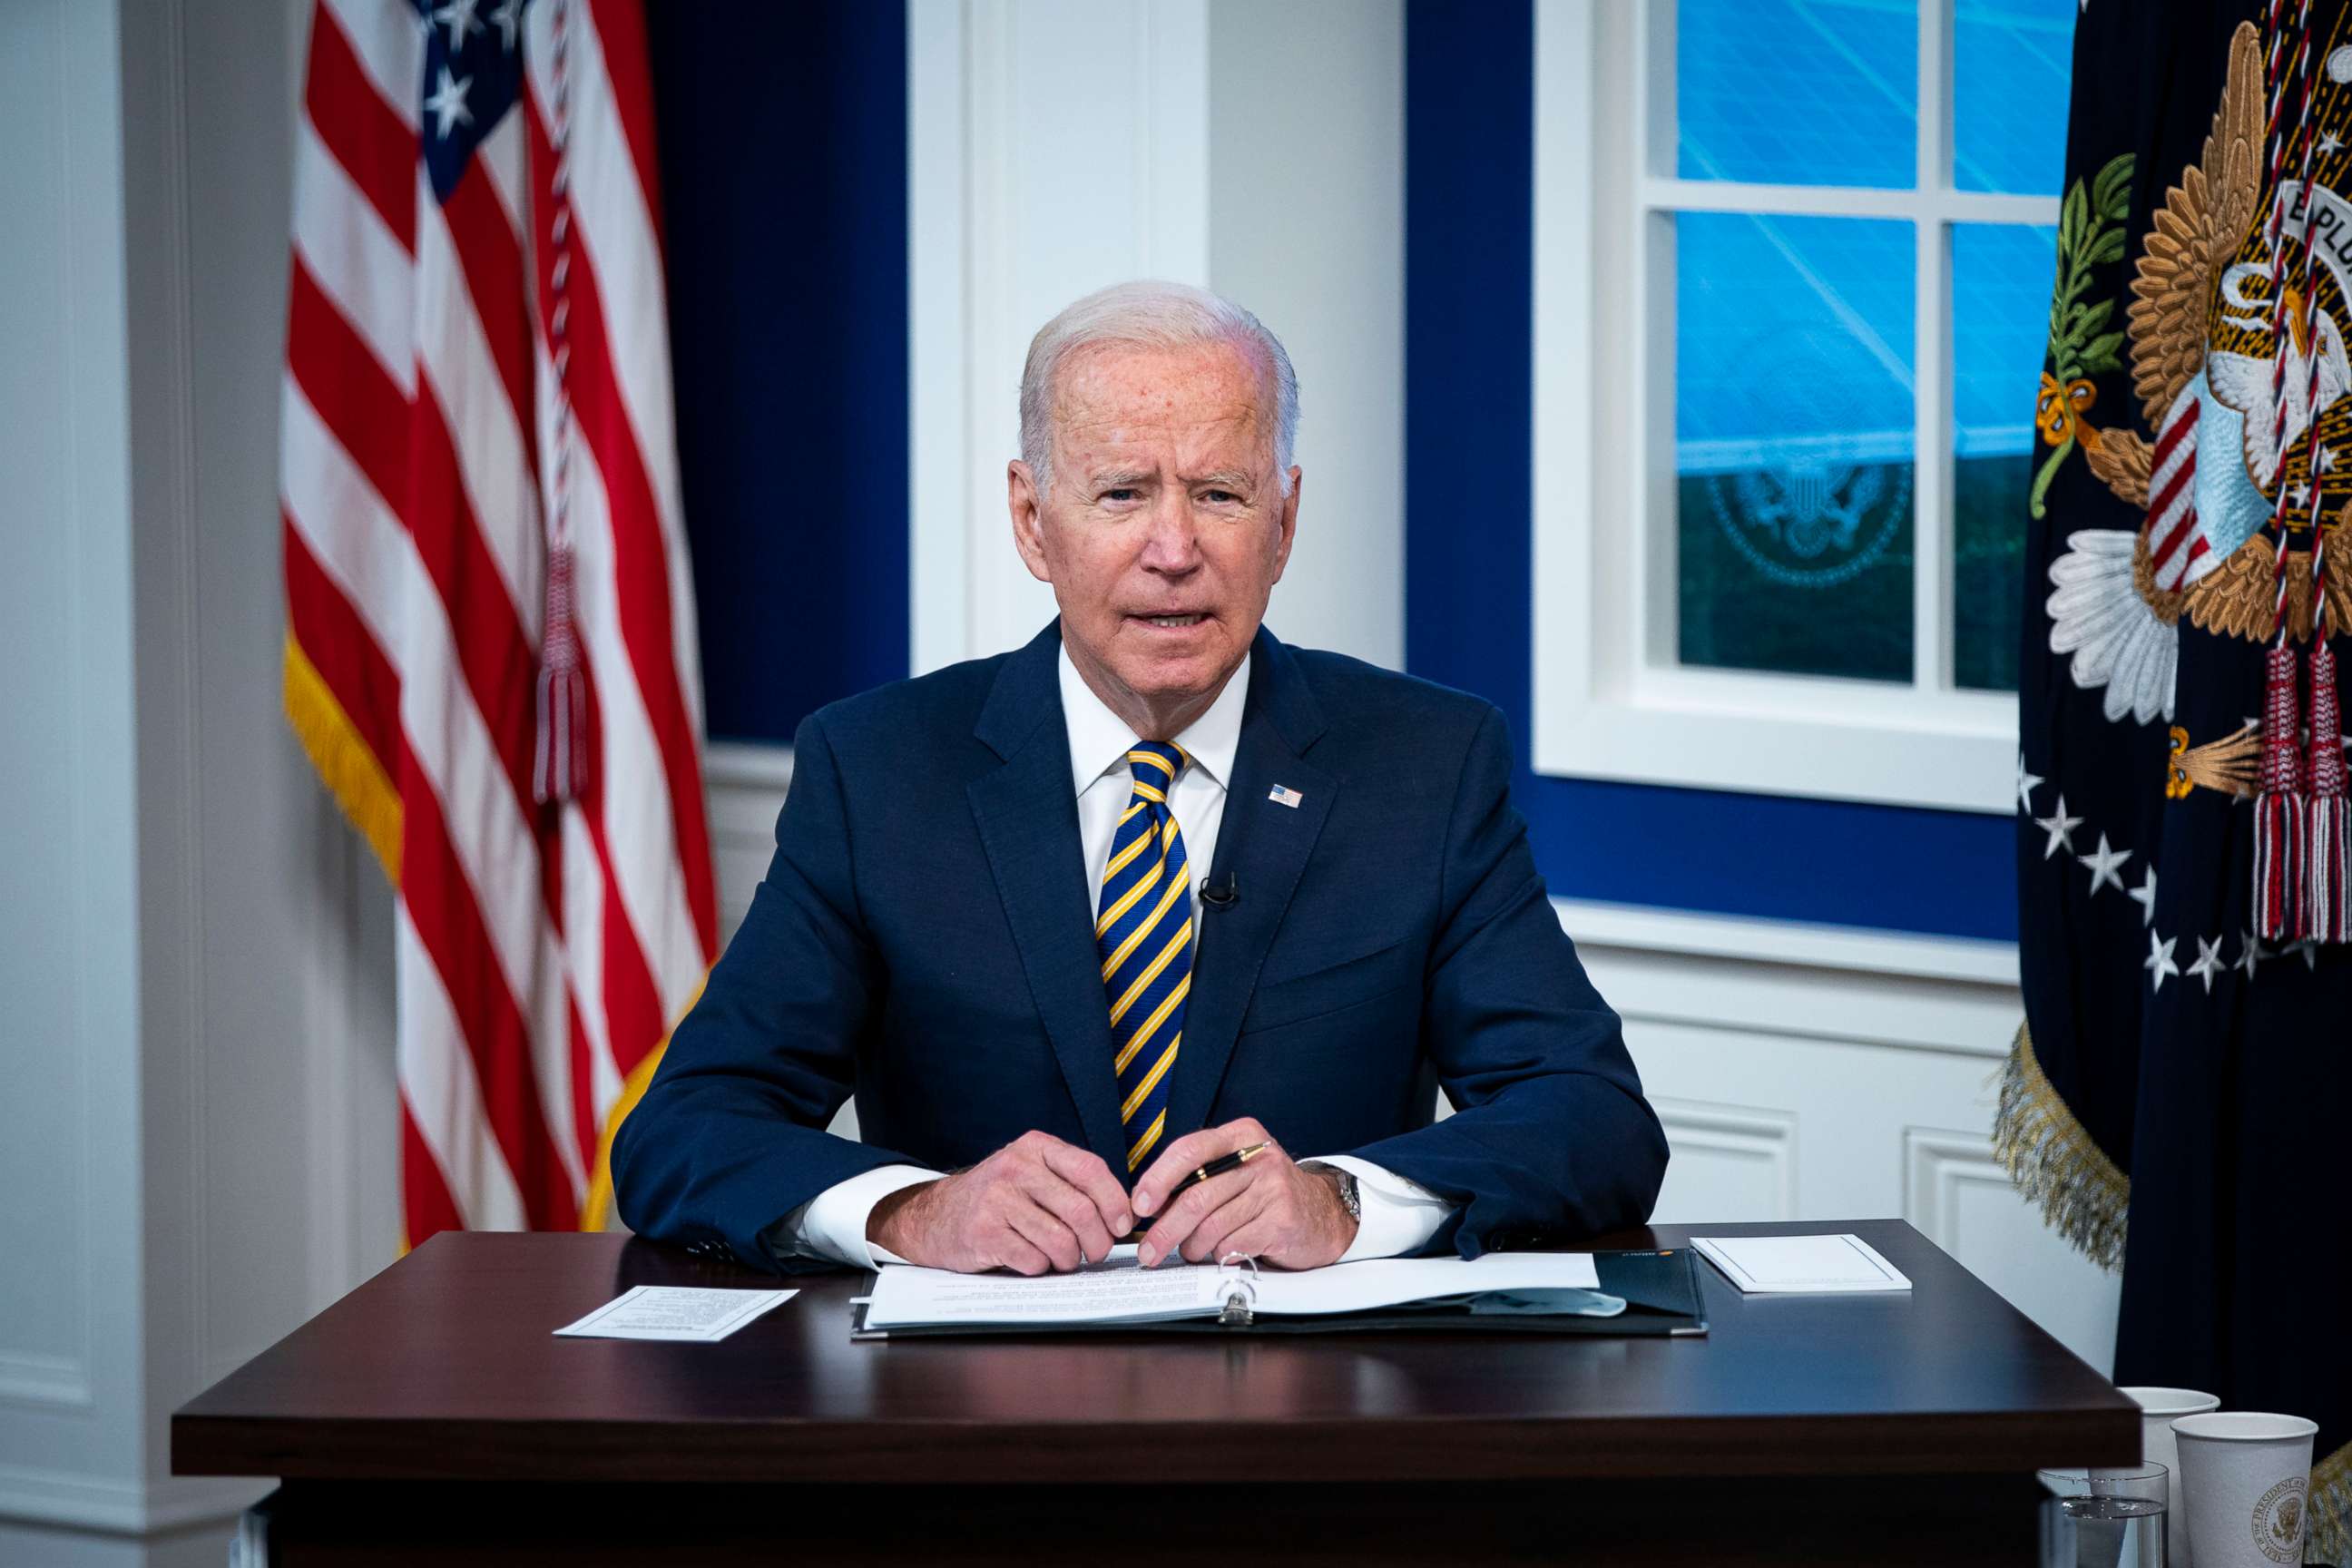 PHOTO: In this Sept. 17, 2021, file photo, President Joe Biden speaks during a conference call on climate change with the Major Economies Forum on Energy and Climate in the Eisenhower Executive Office Building in Washington, D.C.